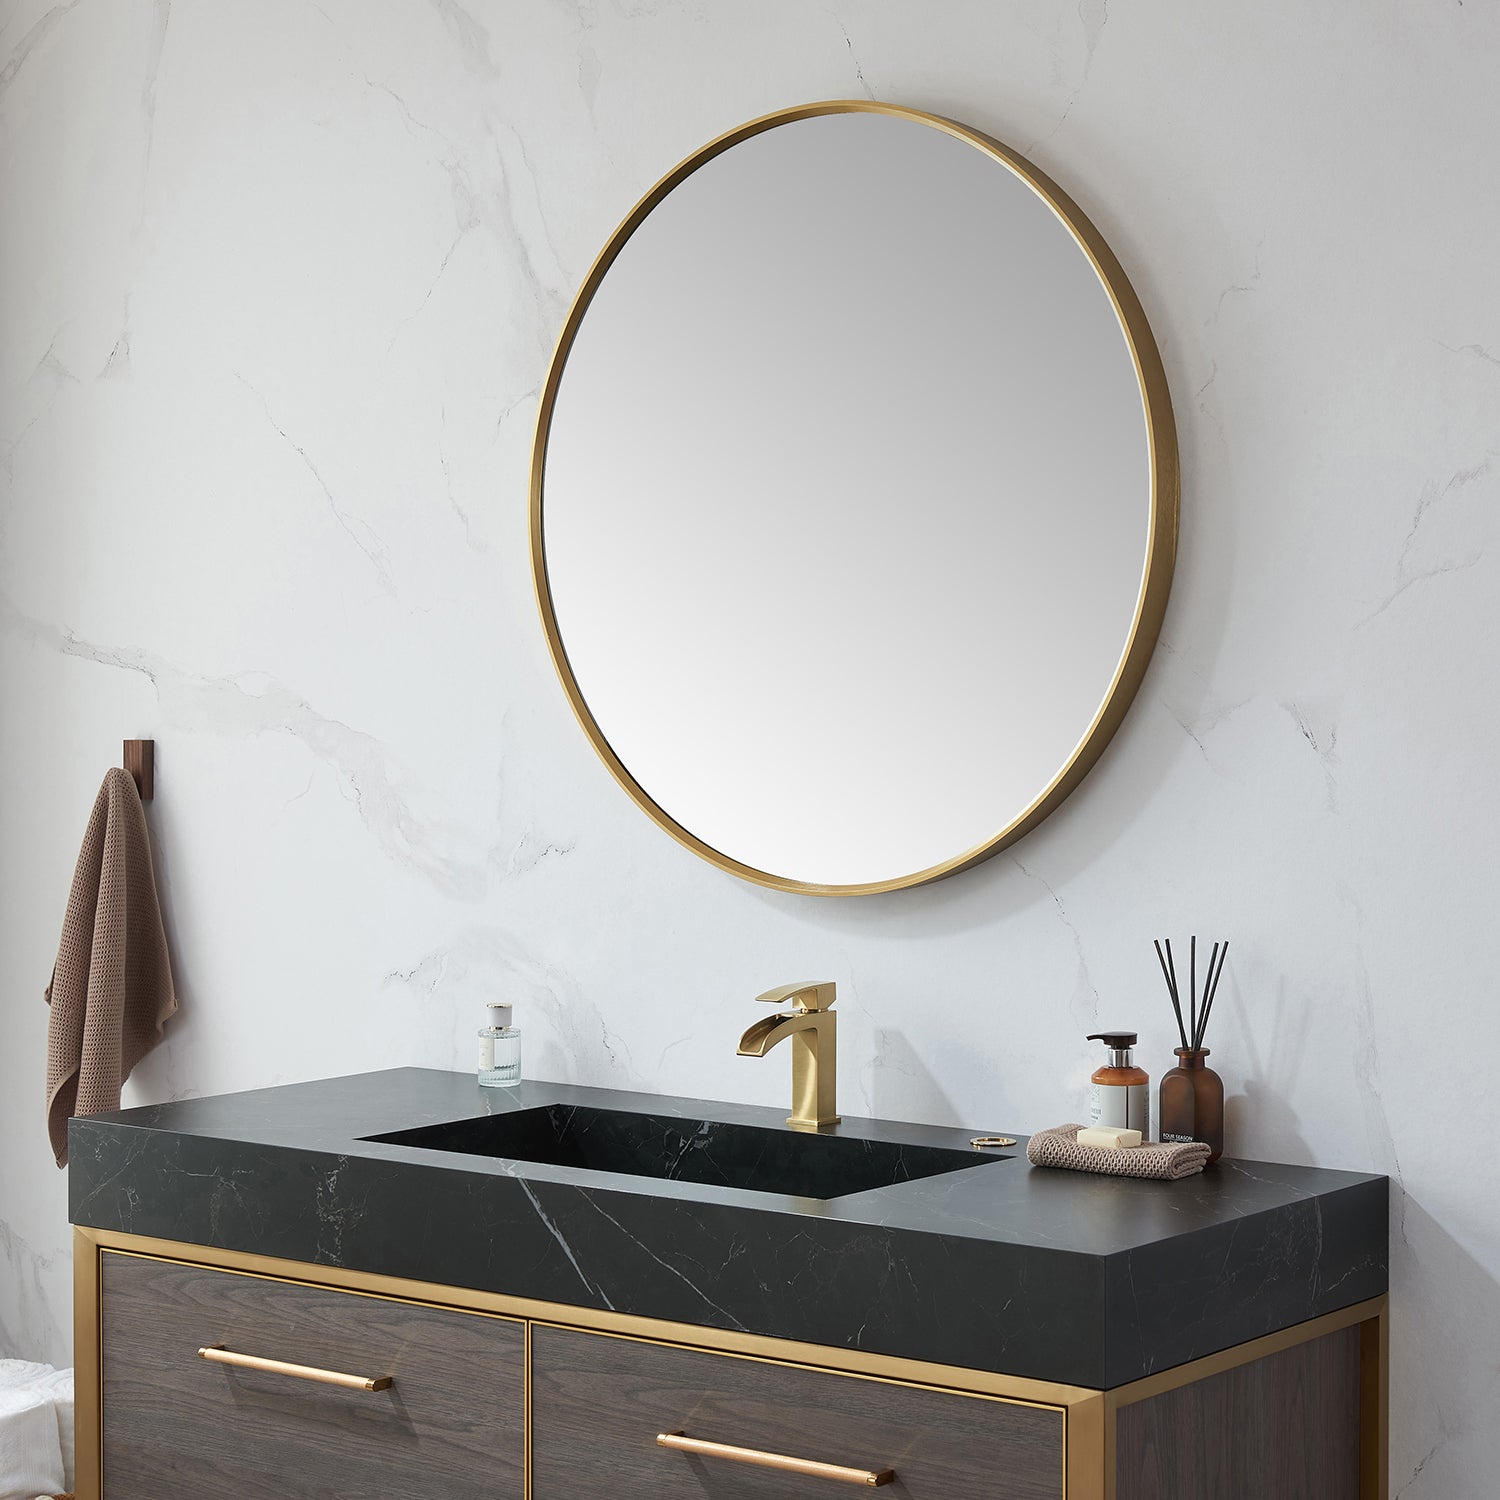 Cascante 35.4 in. W x 35.4 in. H Round Metal Wall Mirror in Brushed  Gold